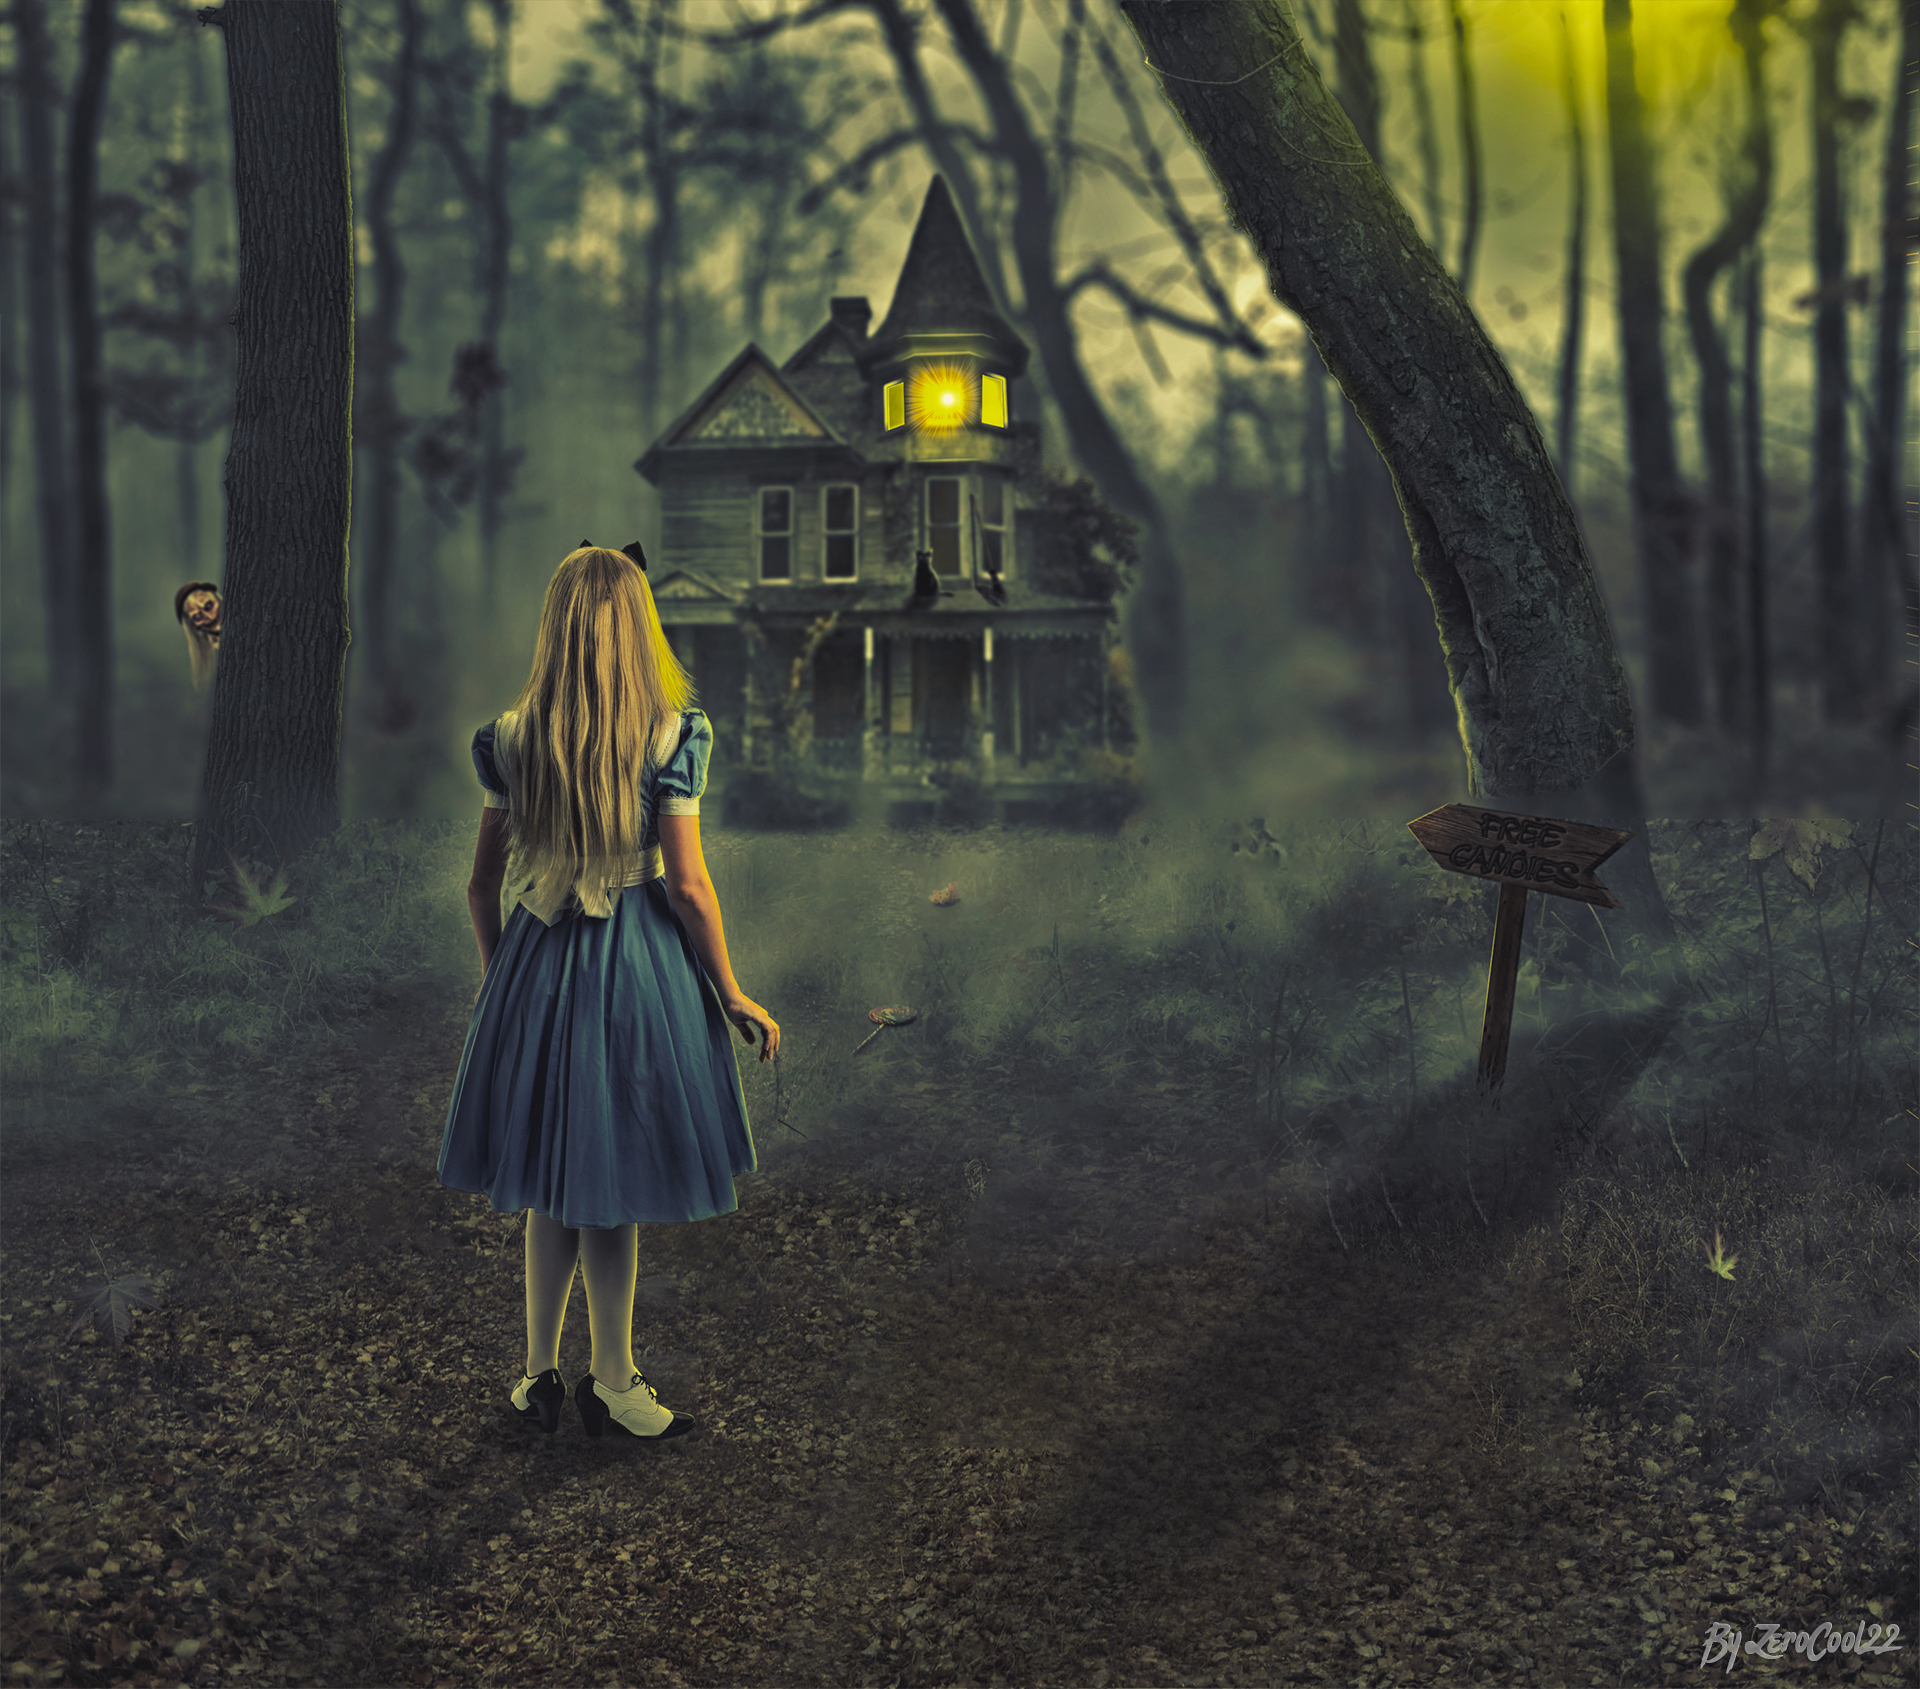 General 1920x1689 lost in the forest photo manipulation children spooky